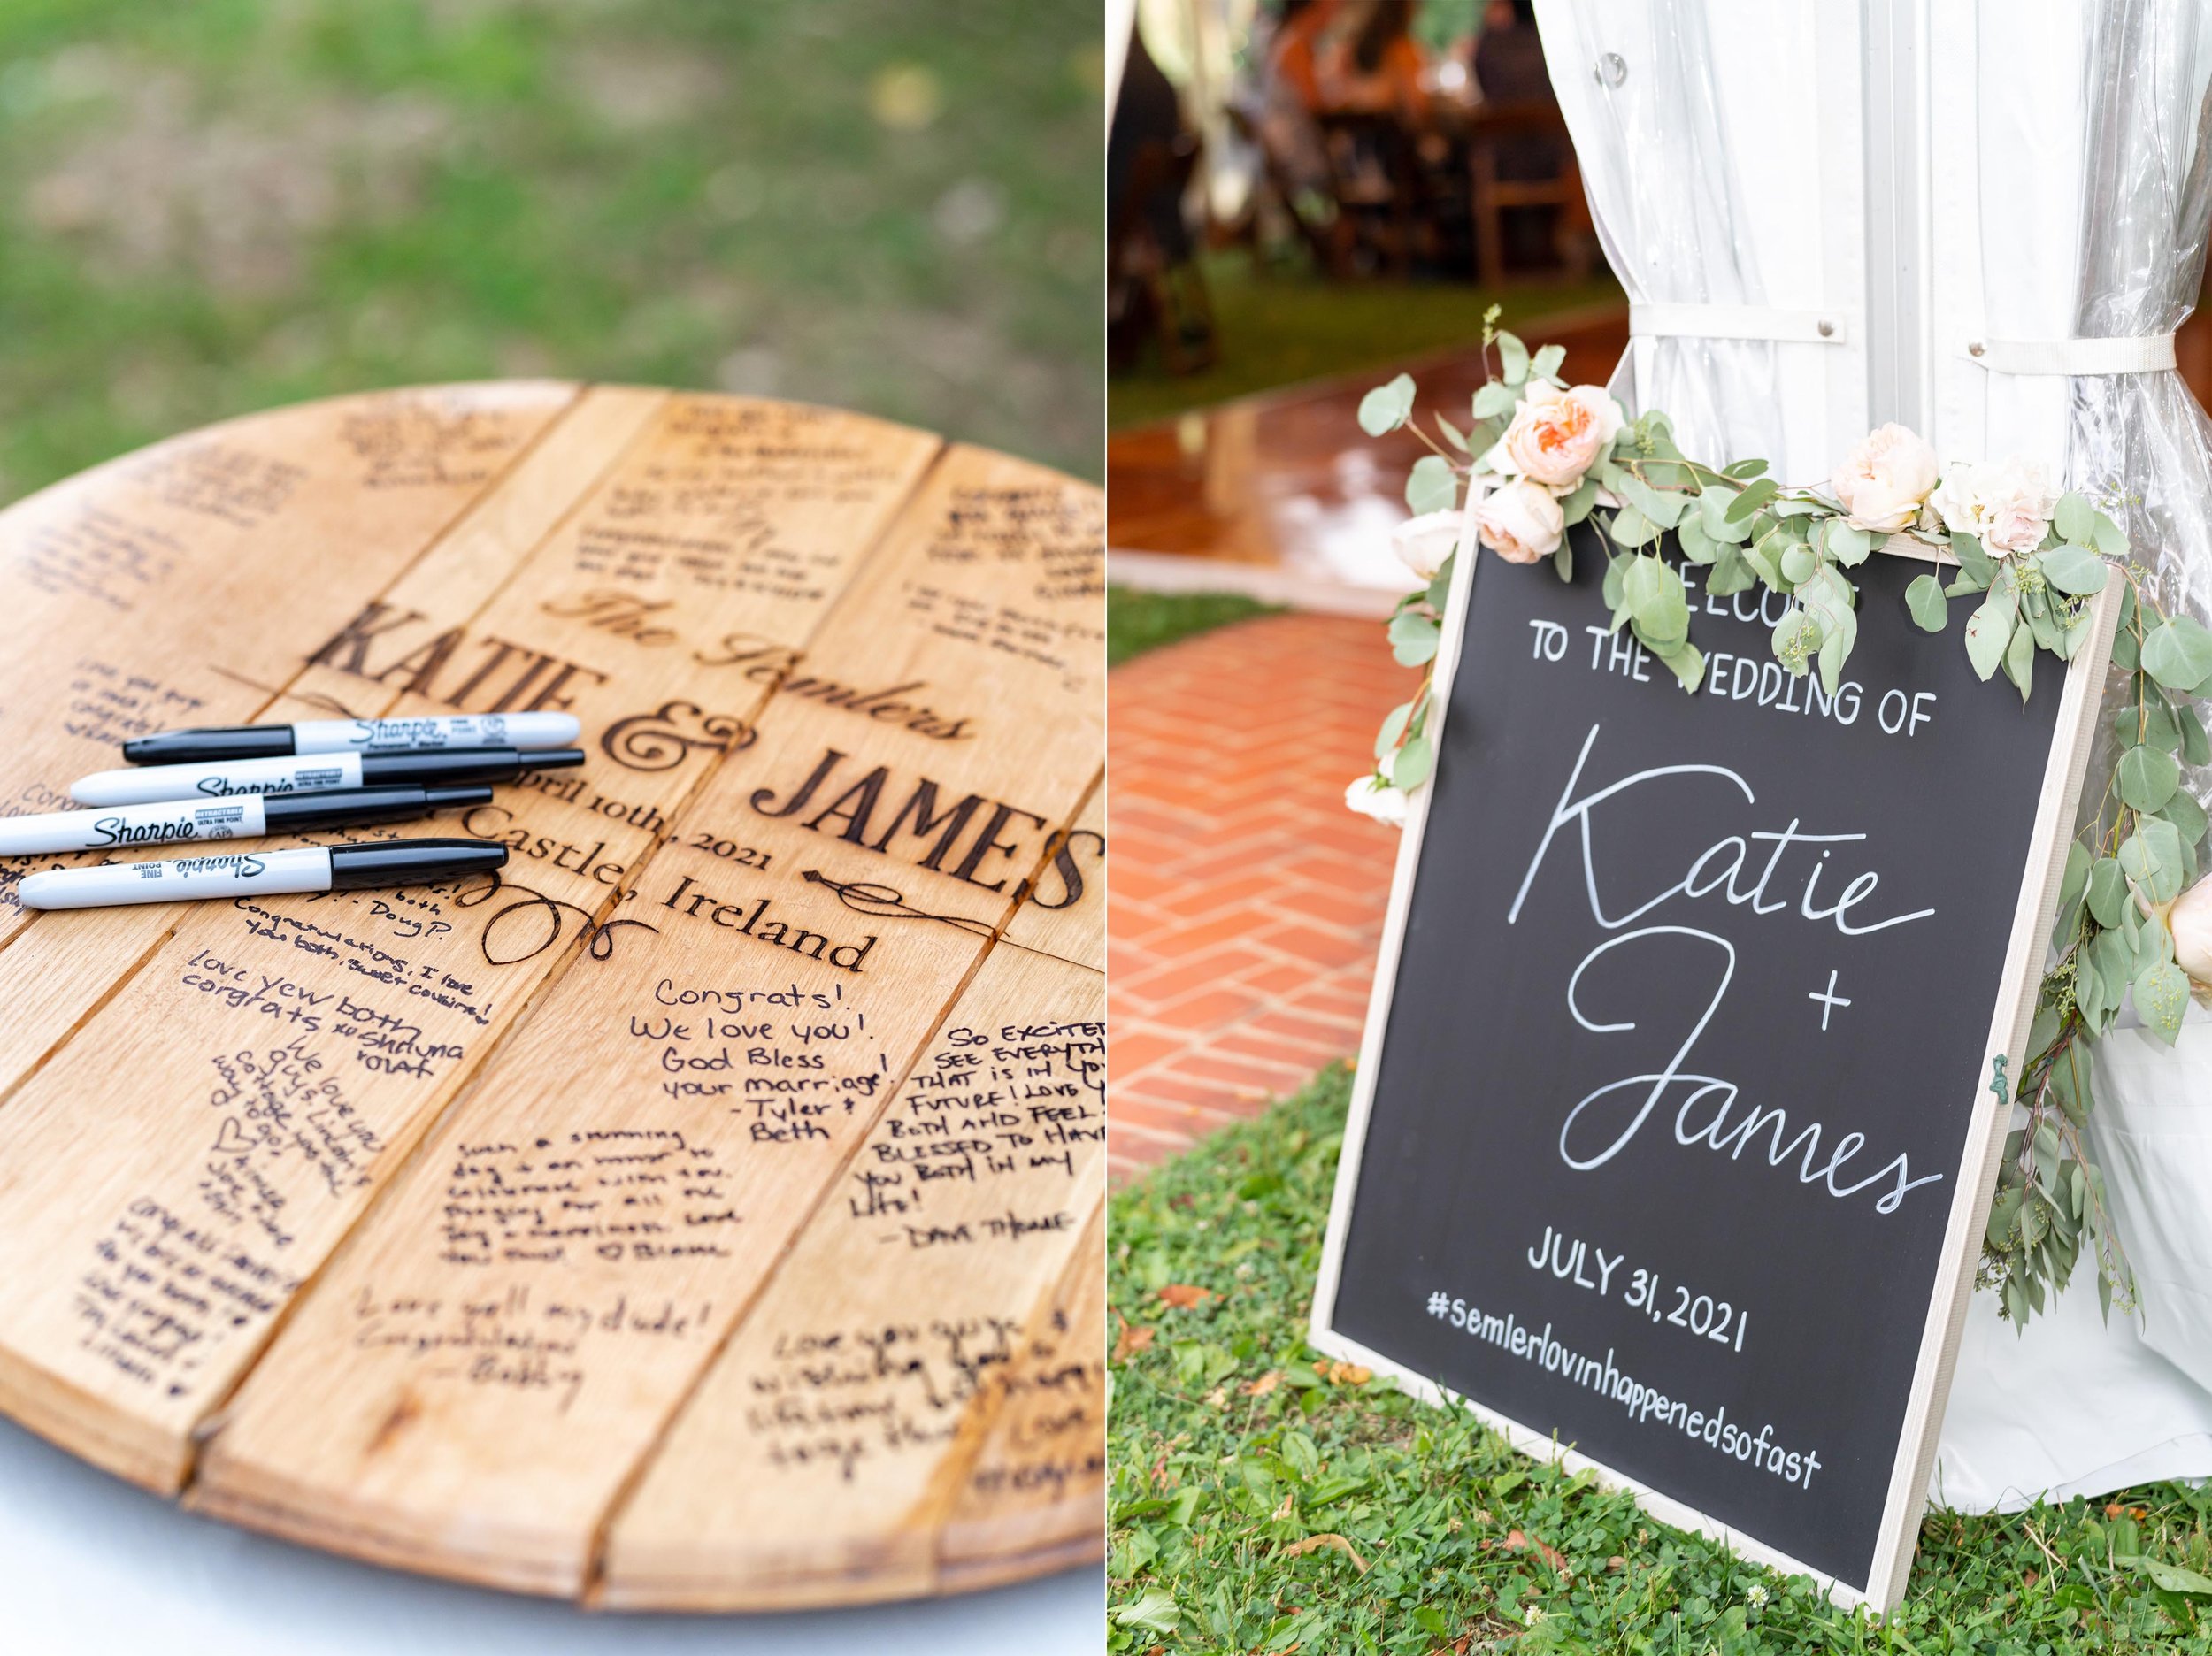 Custom wine barrel signage and guest book for bride and groom on their wedding day